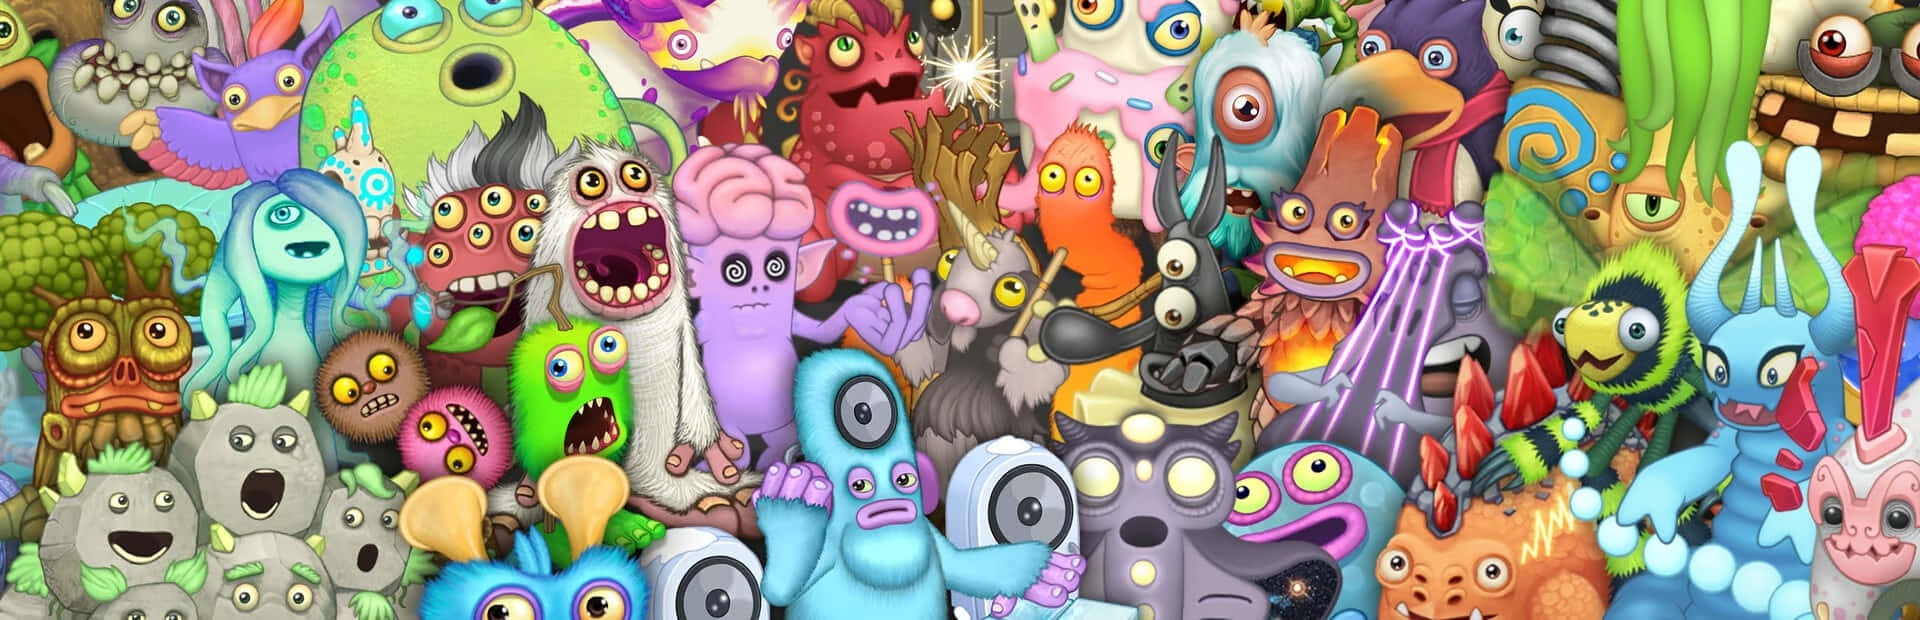 My Singing Monsters Character Collage Wallpaper